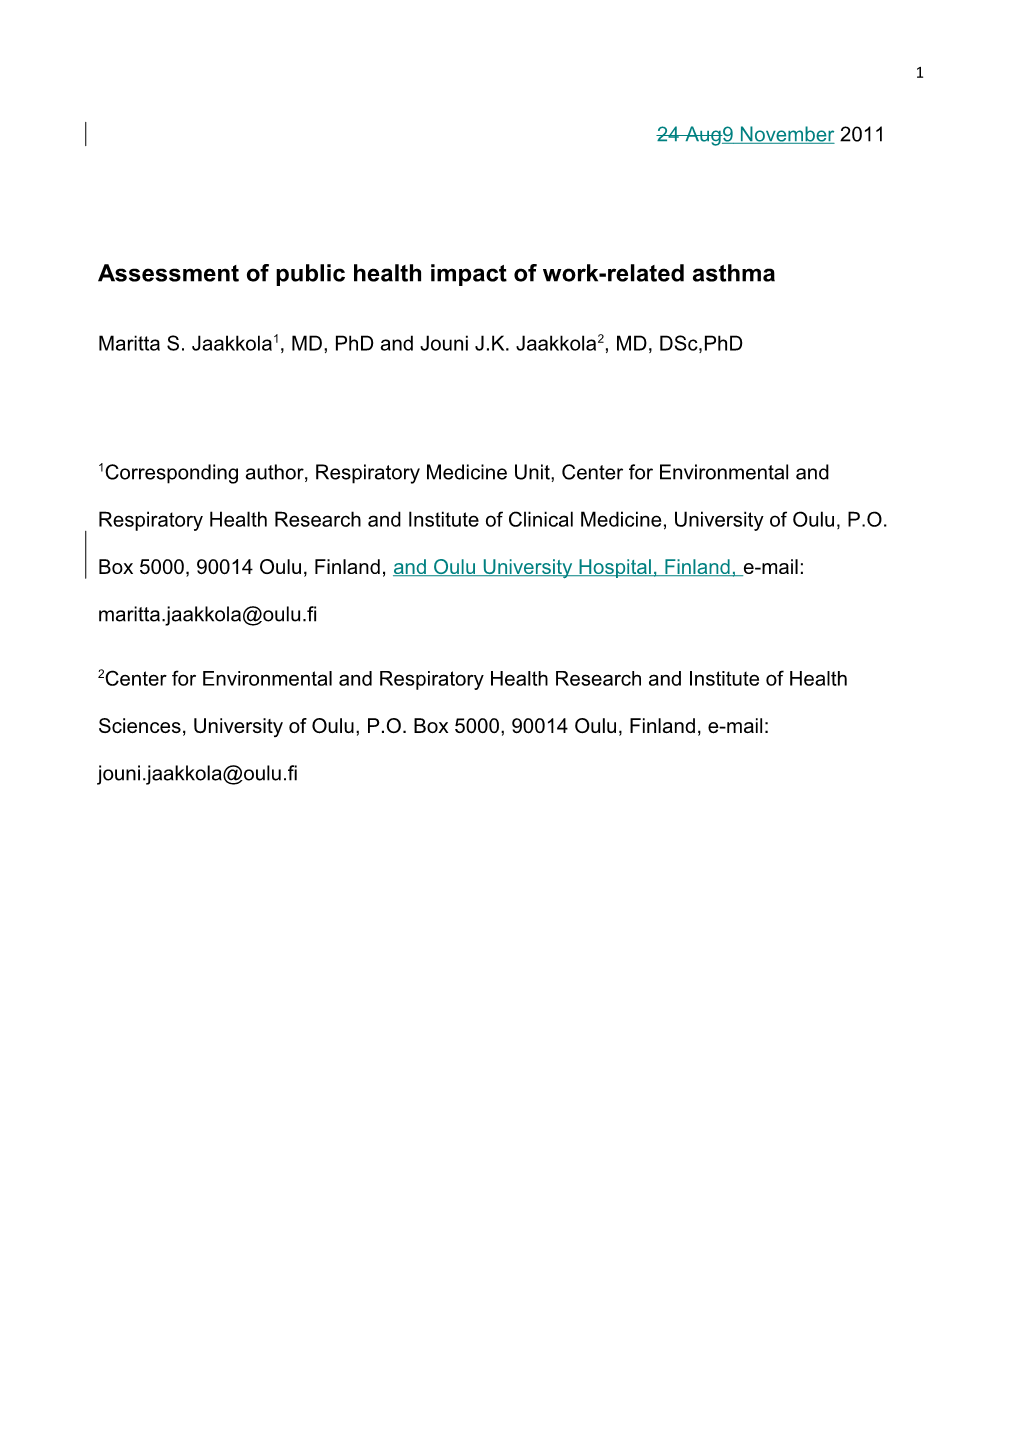 On Assessment of Public Health Impact of Work-Related Asthma